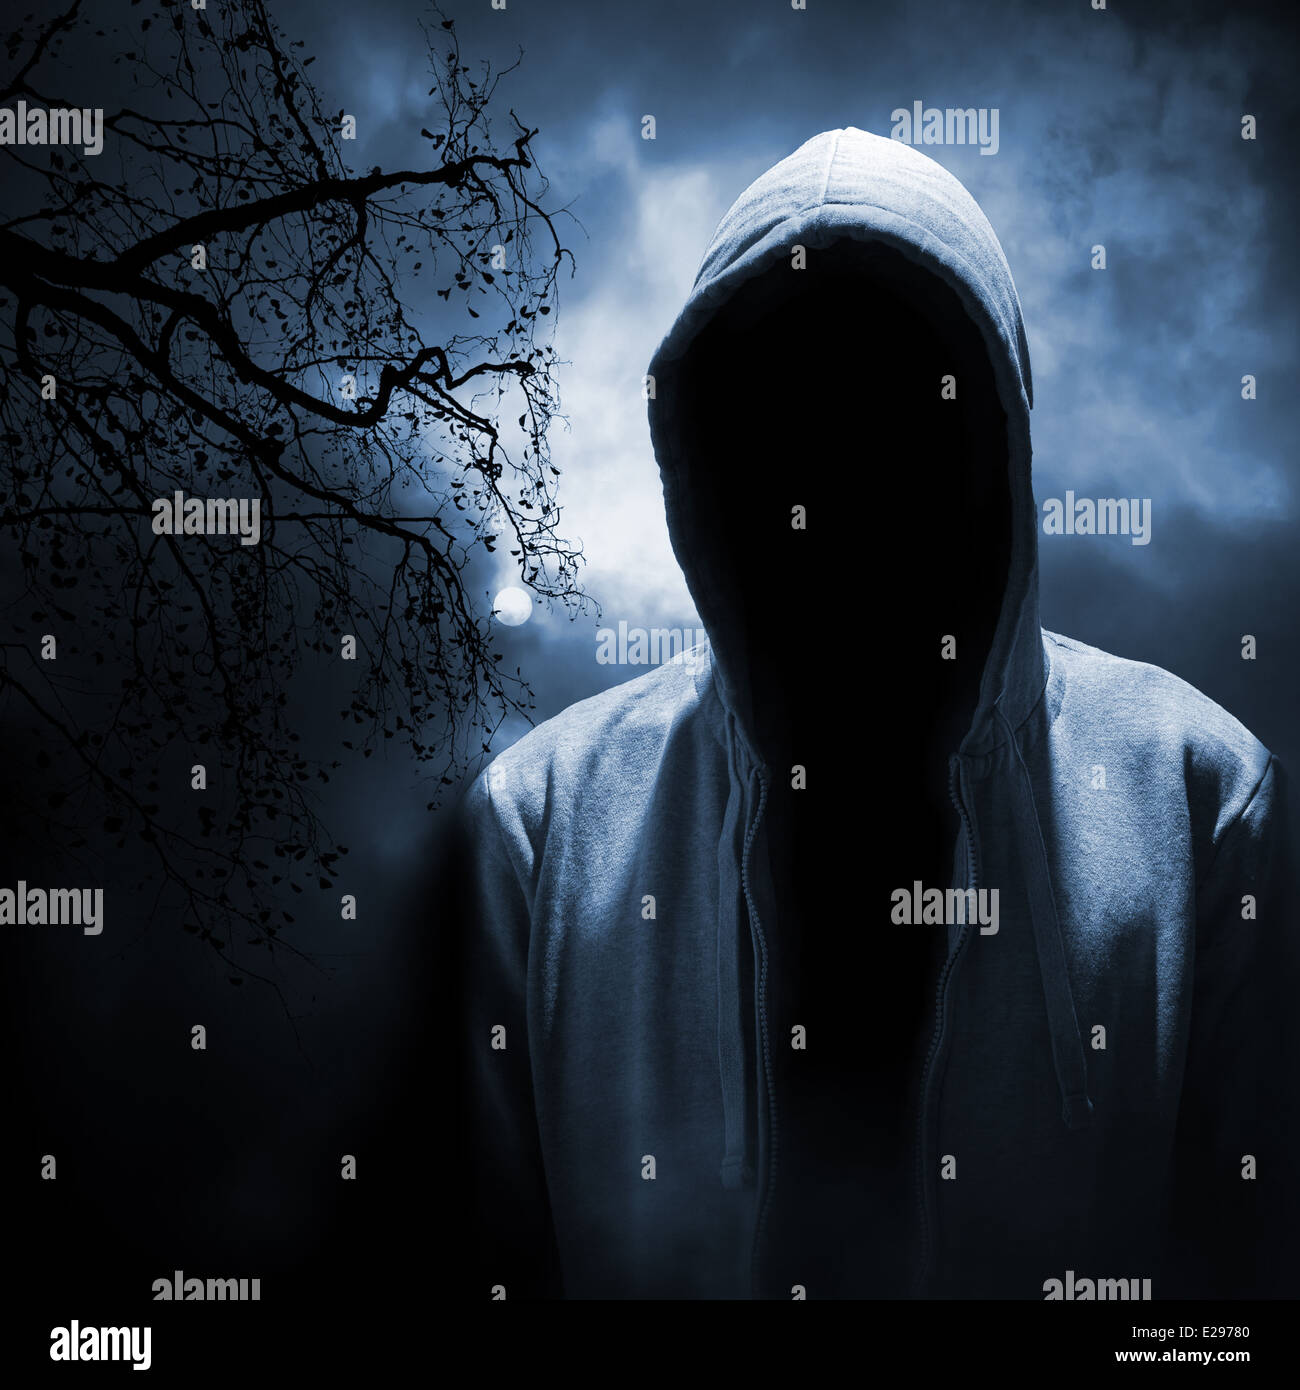 Dangerous man hiding under the hood in the dark night forest Stock Photo